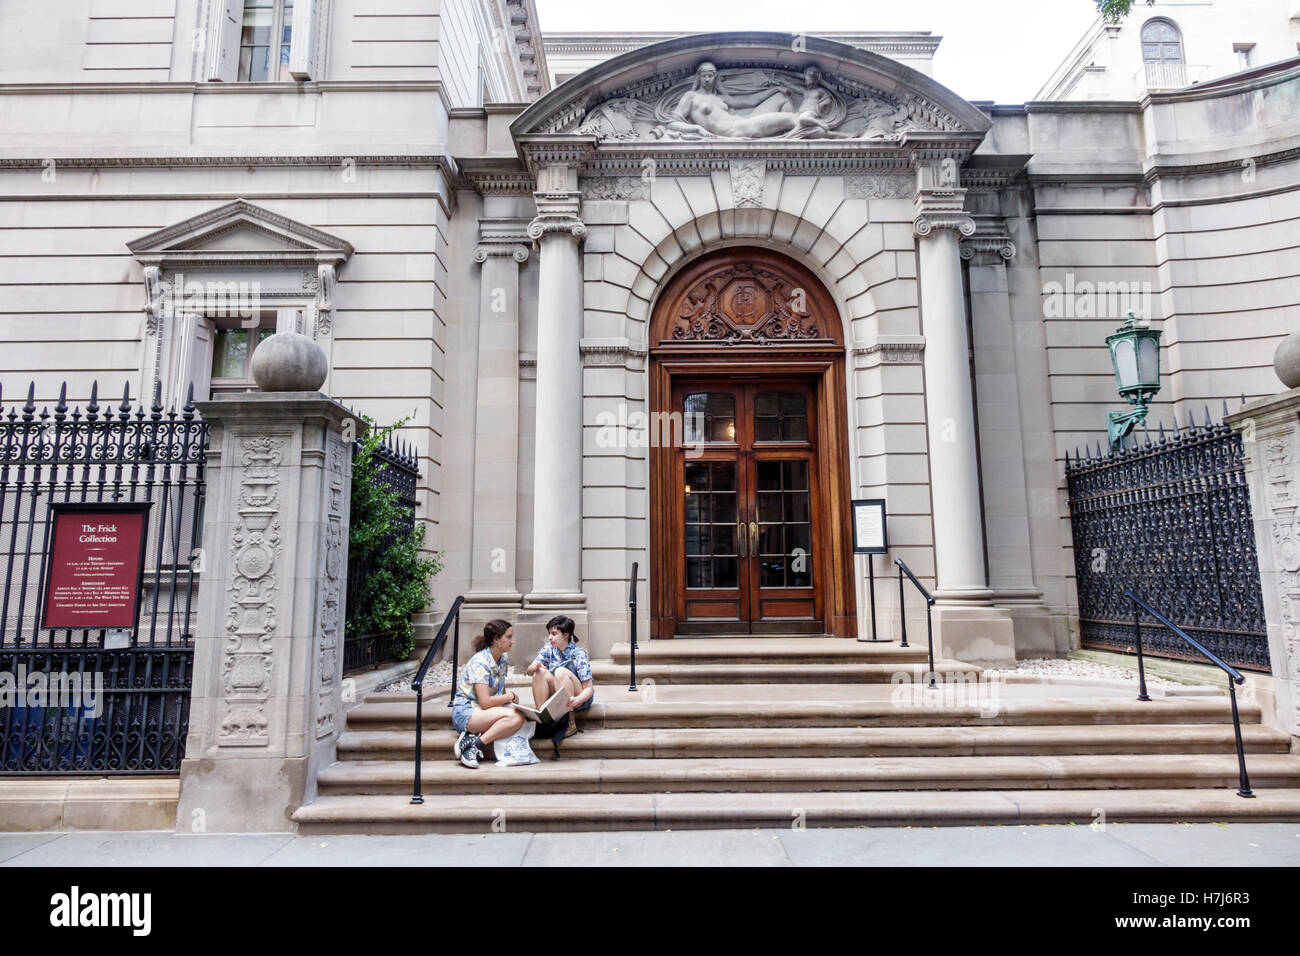 New York City,NY NYC,Manhattan,Upper East Side,The Frick Collection,museo d'arte,esterno,ingresso principale,frontone ad arco,teen teens teenage teena Foto Stock